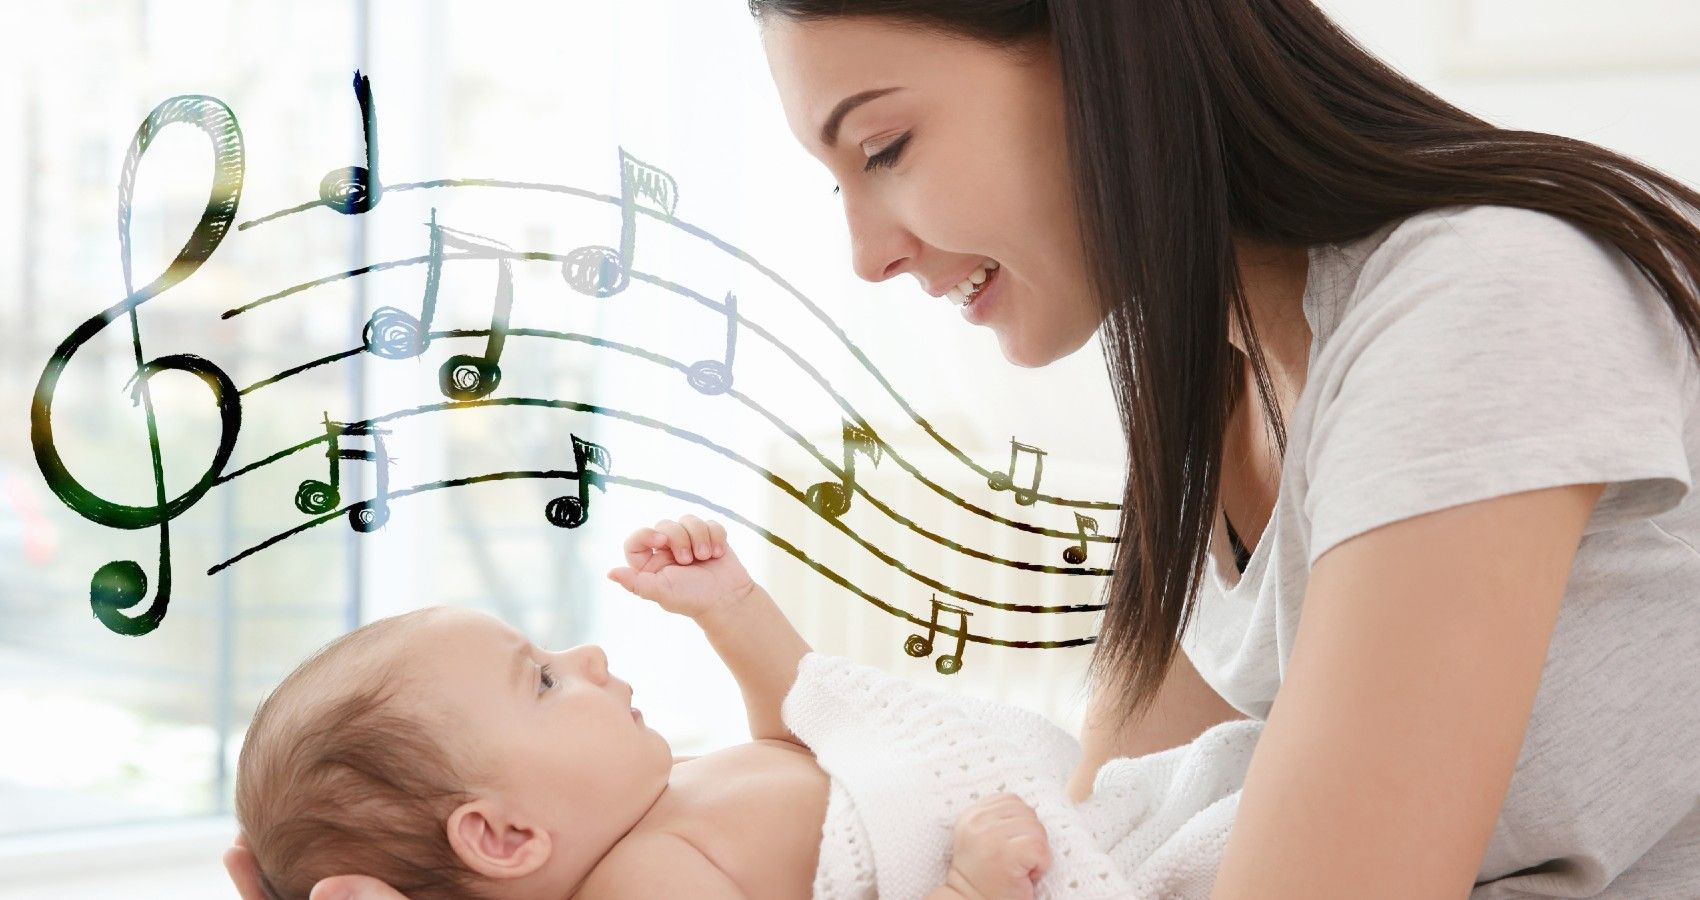 Classic Lullabies for Baby